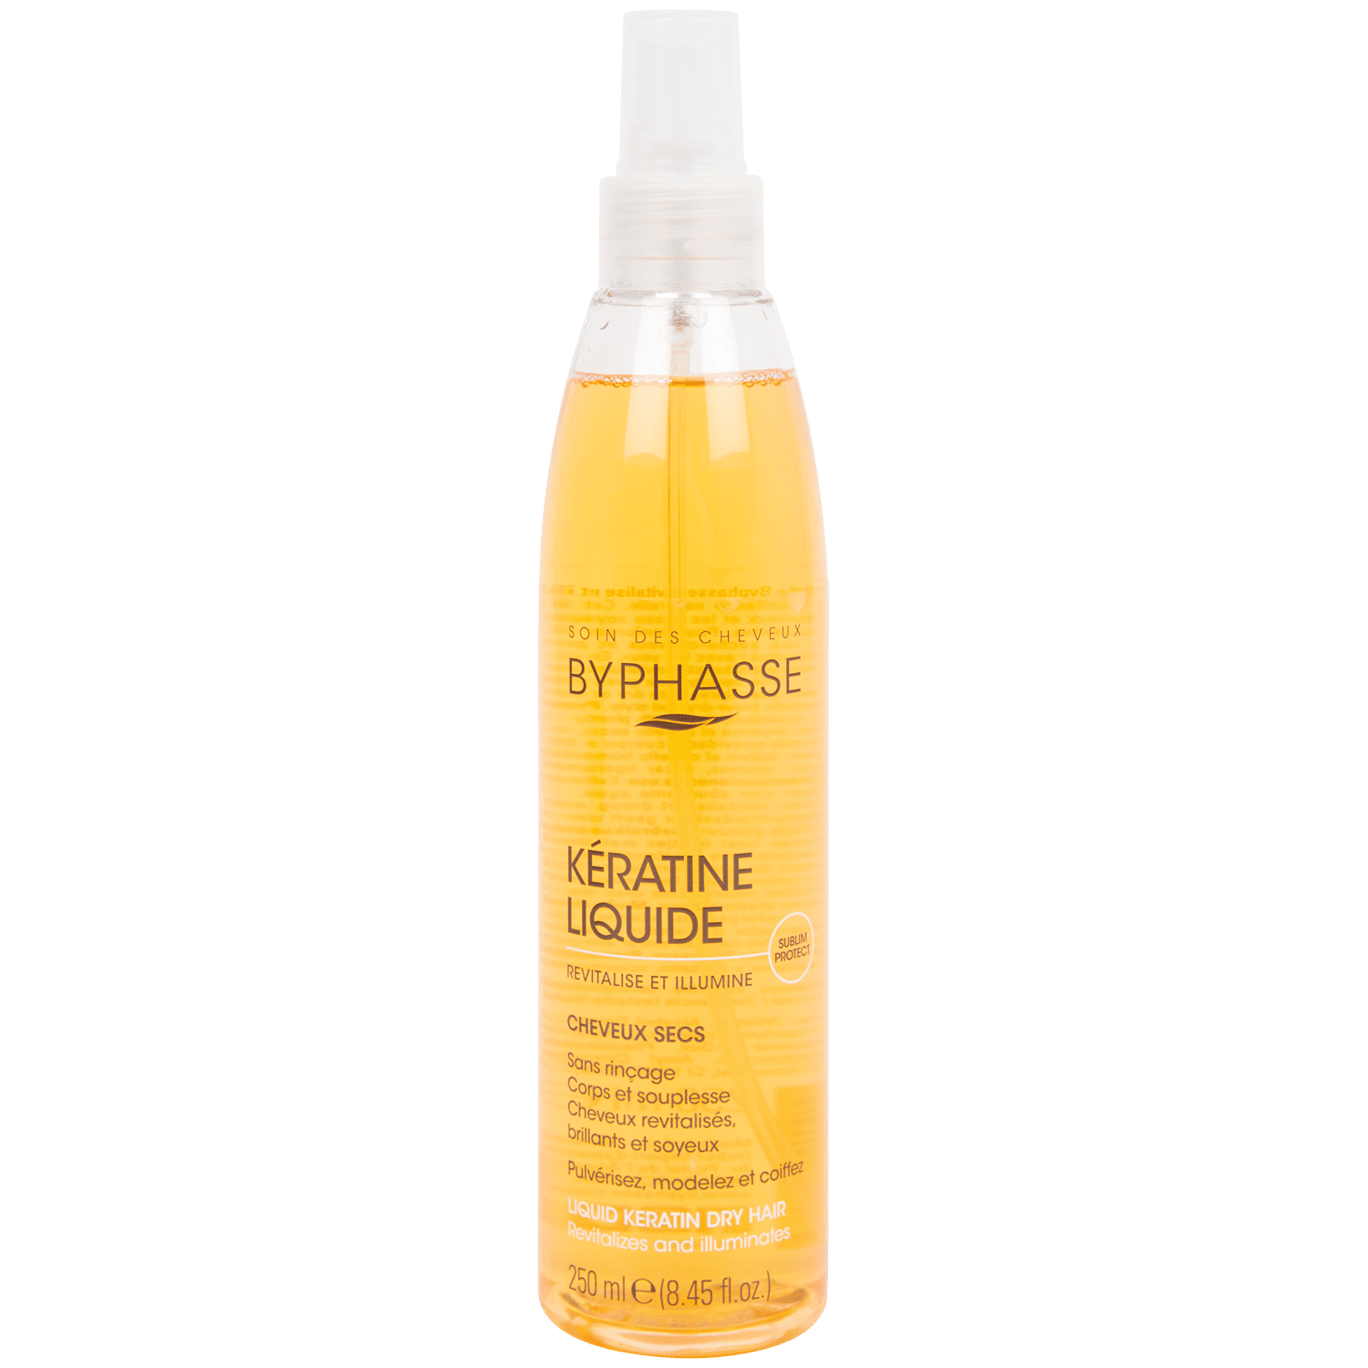 Byphasse keratinespray Active Protection